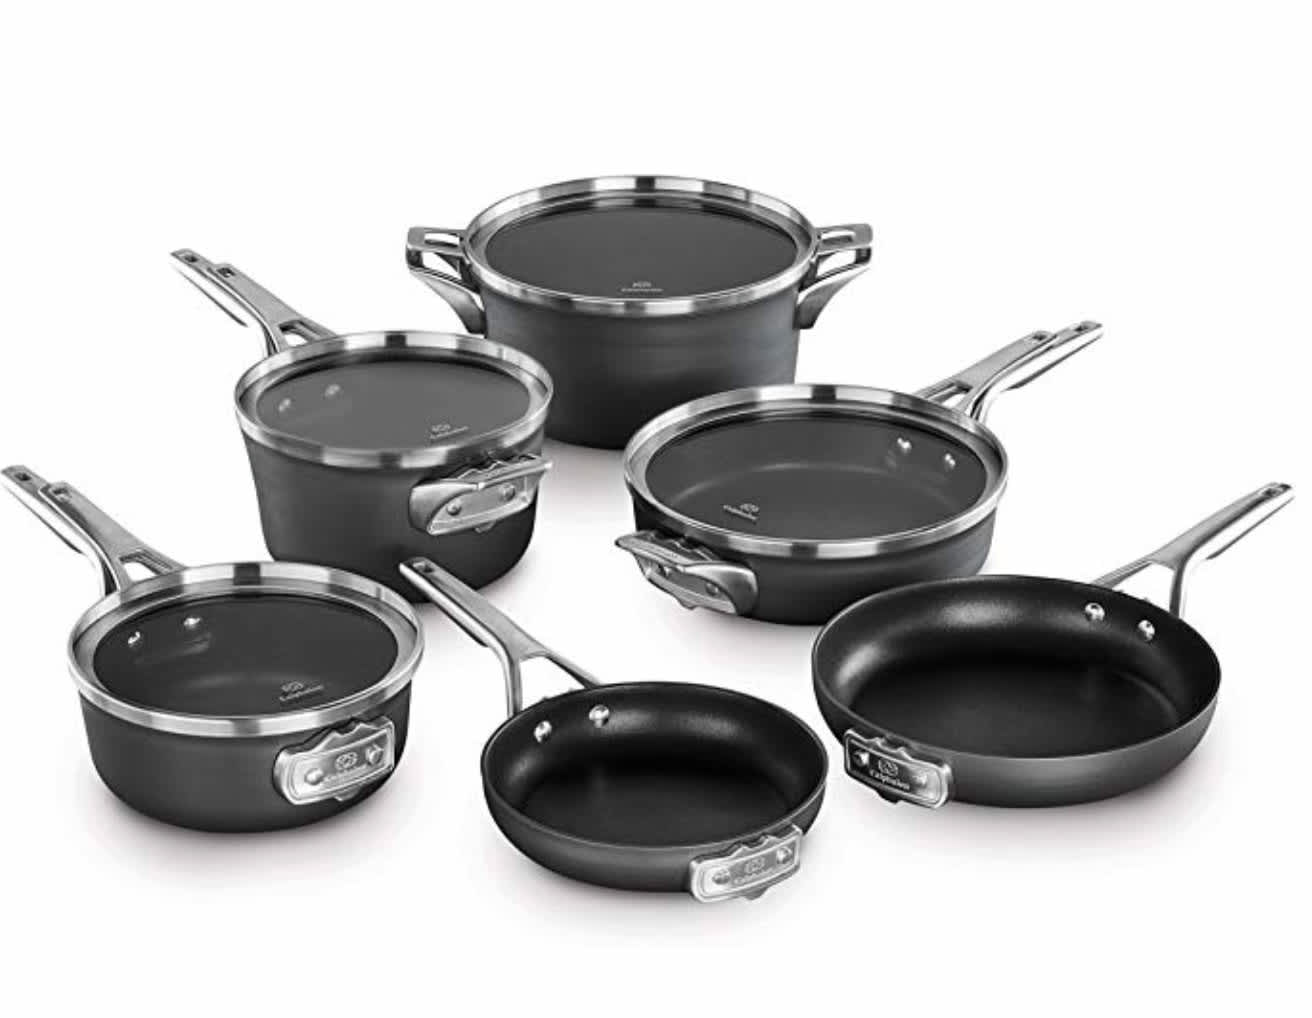 Best cookware sets of 2019